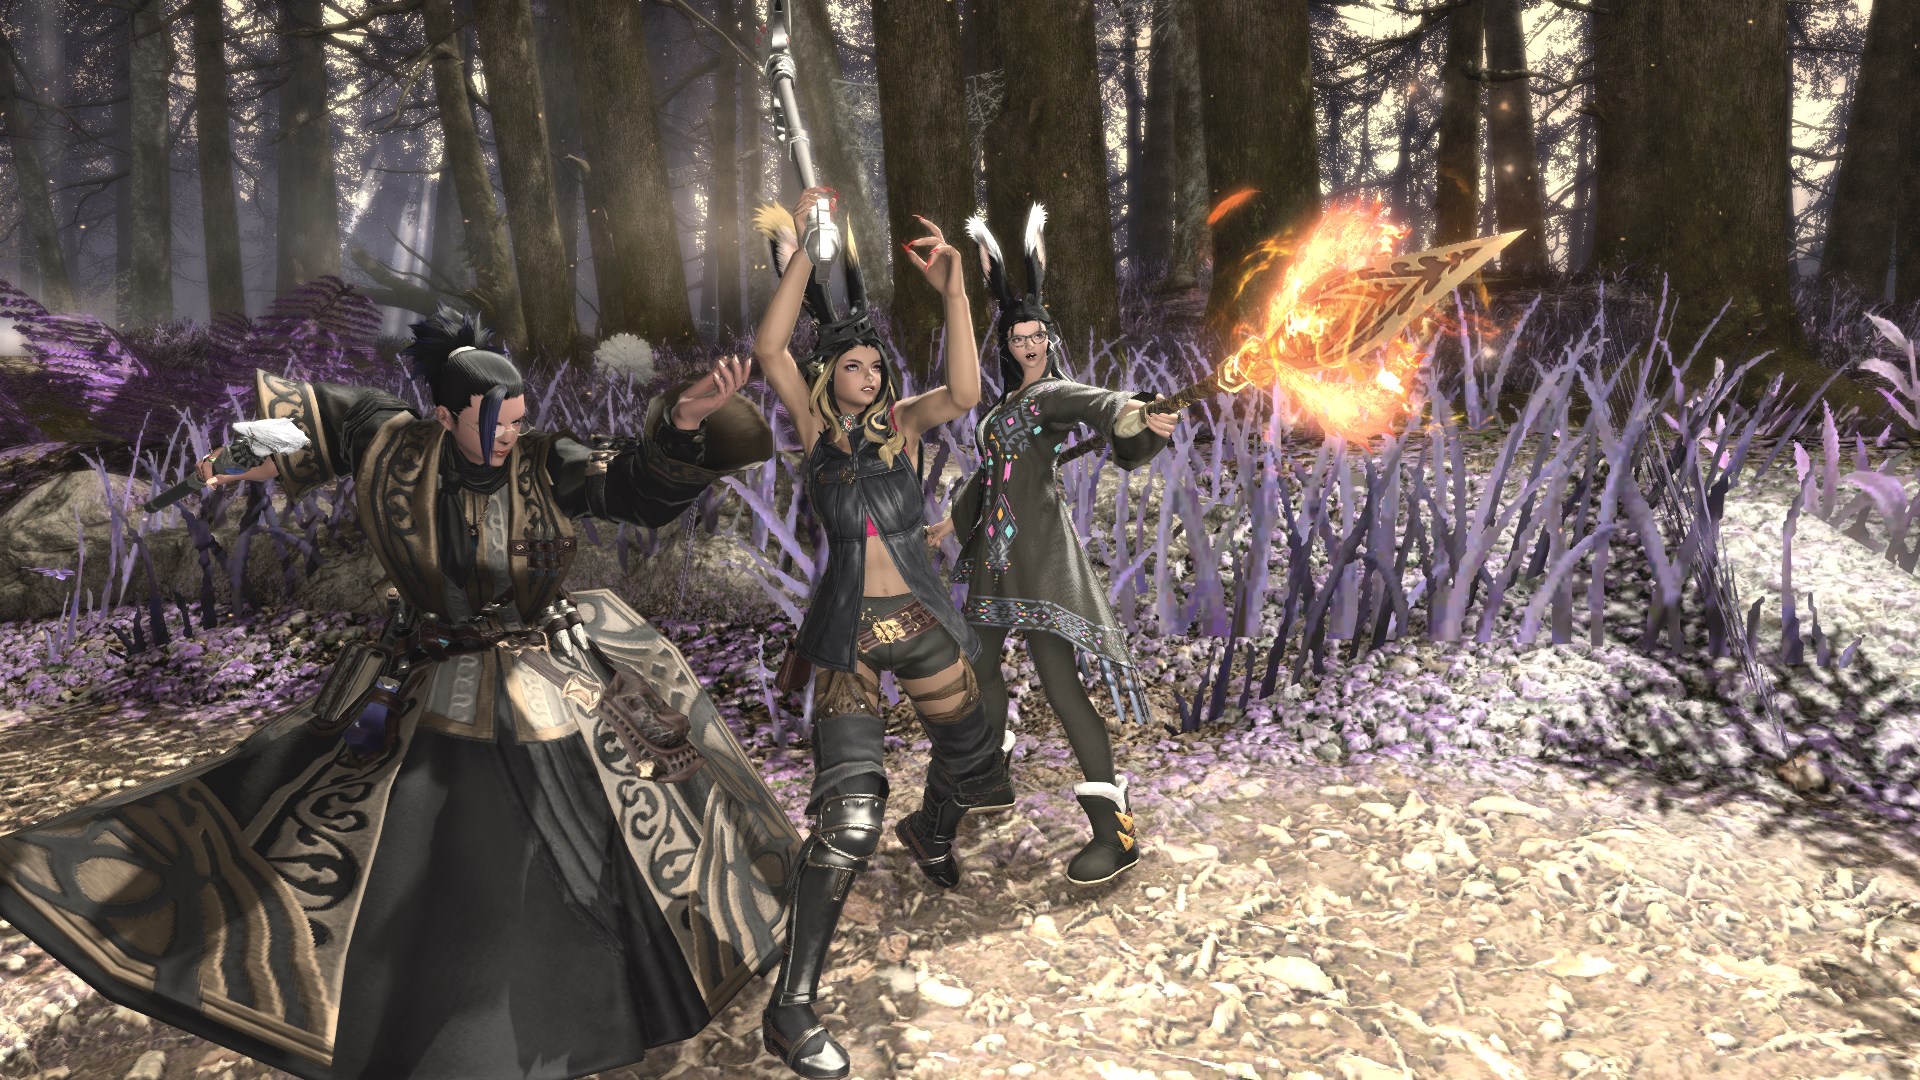 Three FF14 characters stand heroically in a dull-colored forest